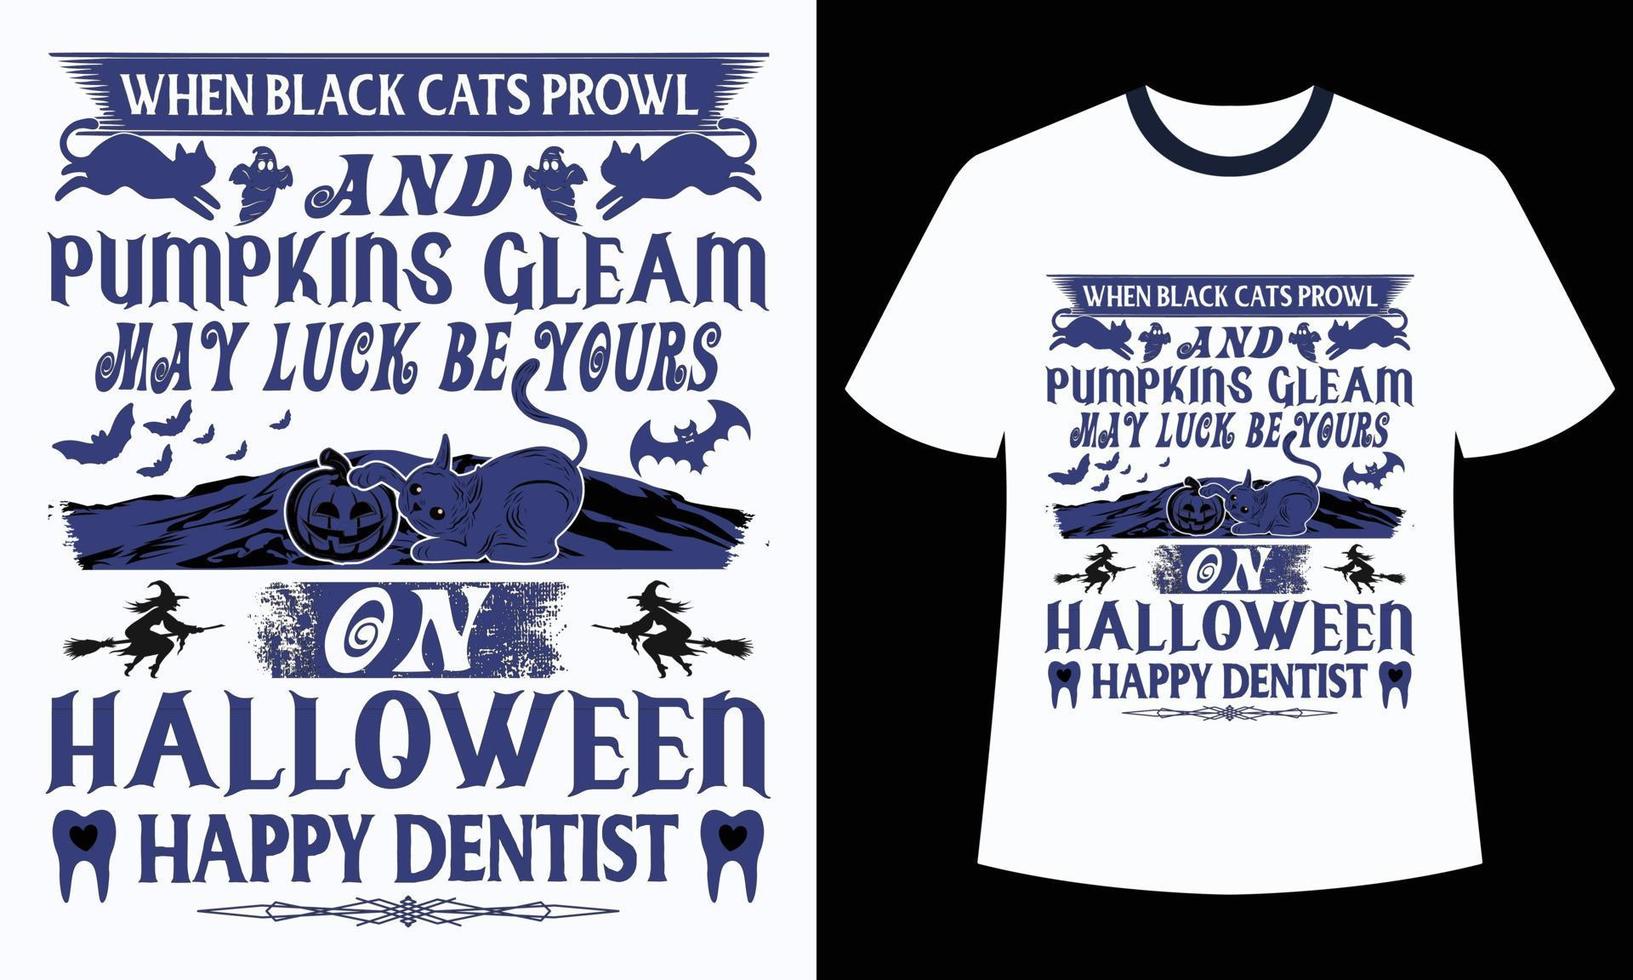 Amazing Halloween t-shirt Design  When Black Cats Prowl And Pumpkins Gleam May Luck Be Yours On Halloween Happy Dentist vector